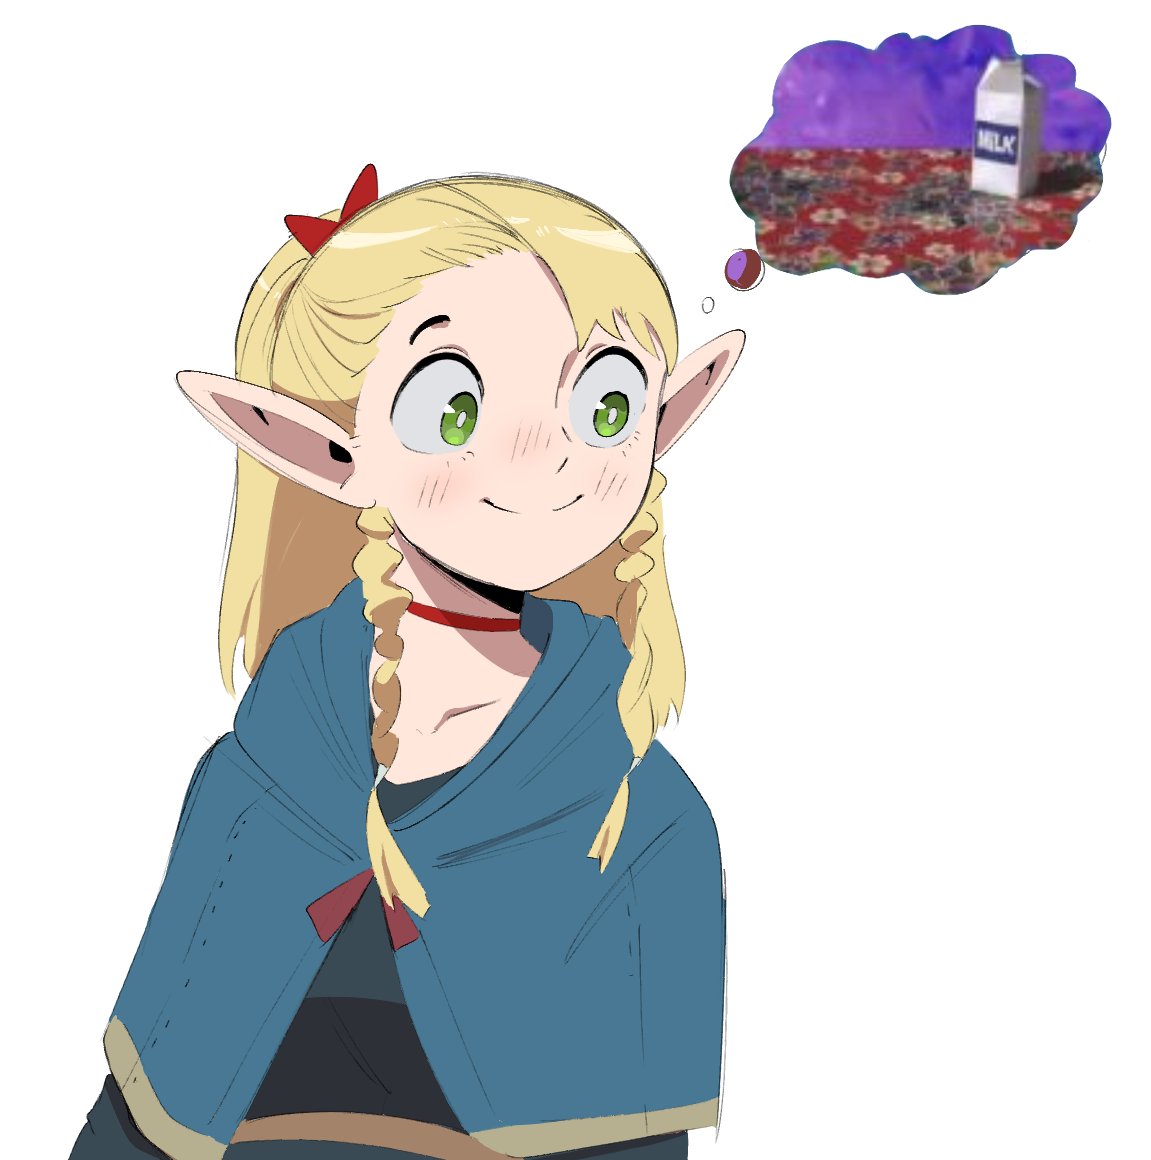 Just wanted to draw Marcille :D